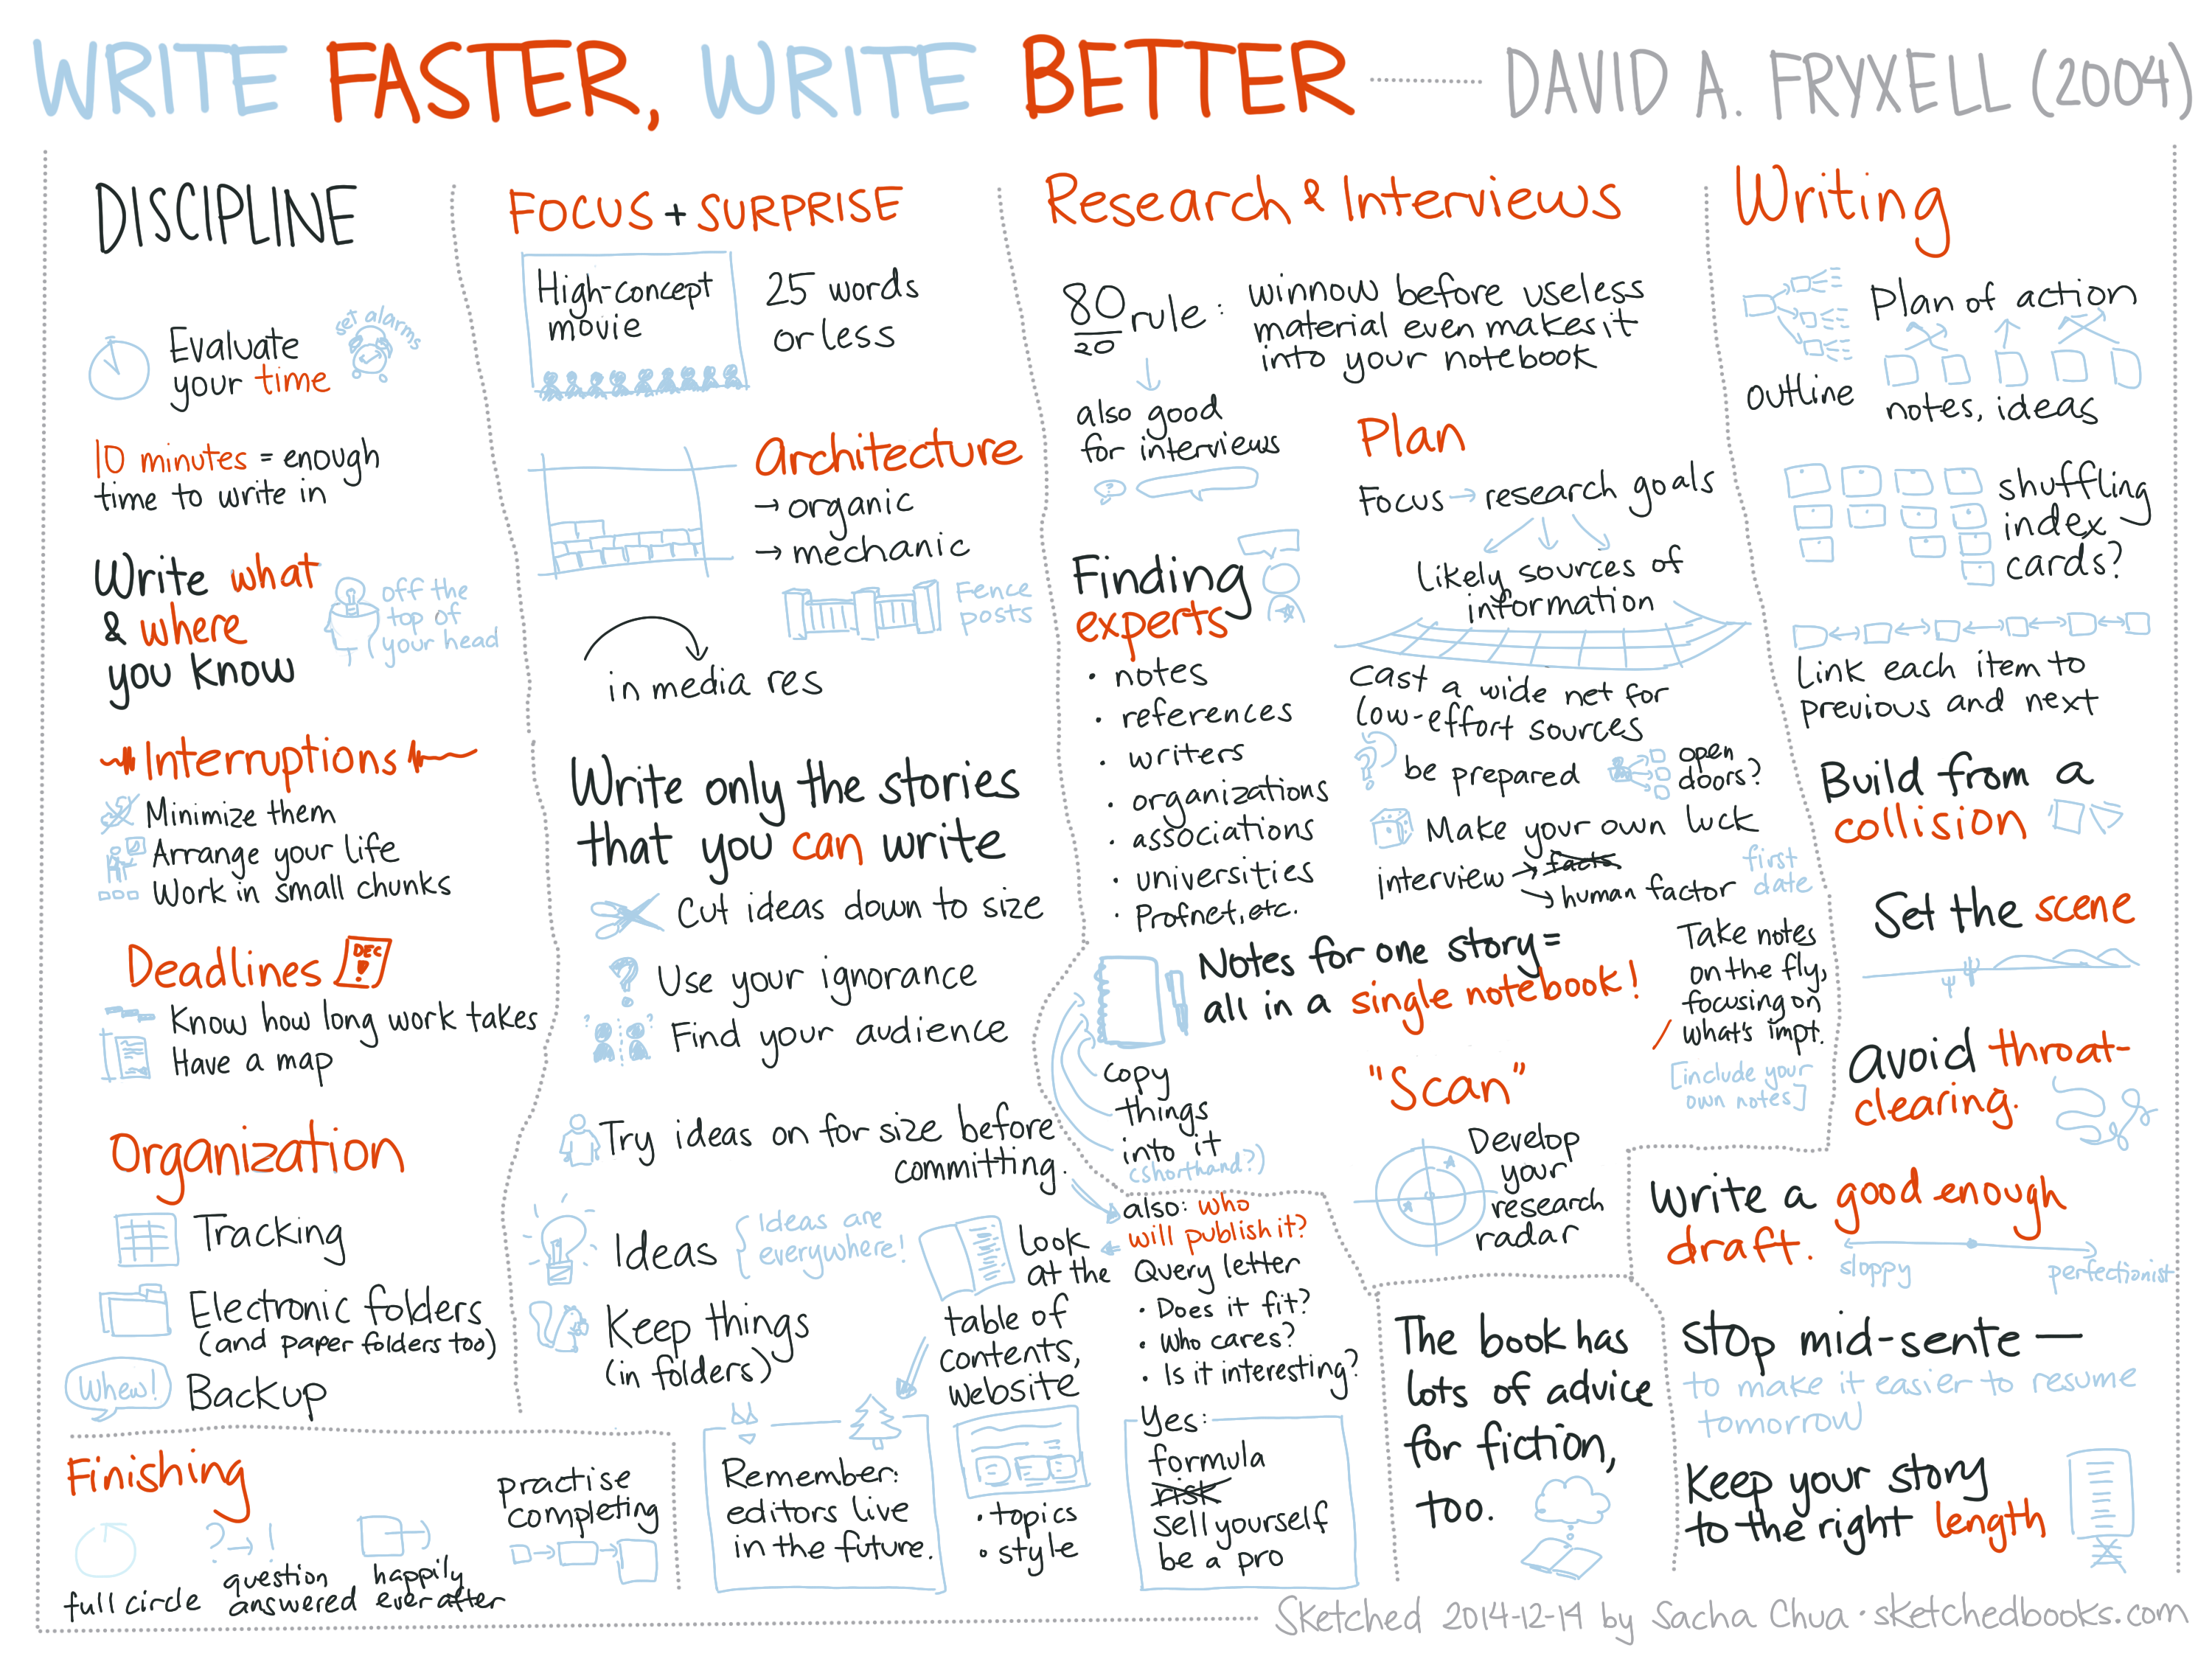 2014-12-14 Sketched Book - Write Faster Write Better - David A Fryxell